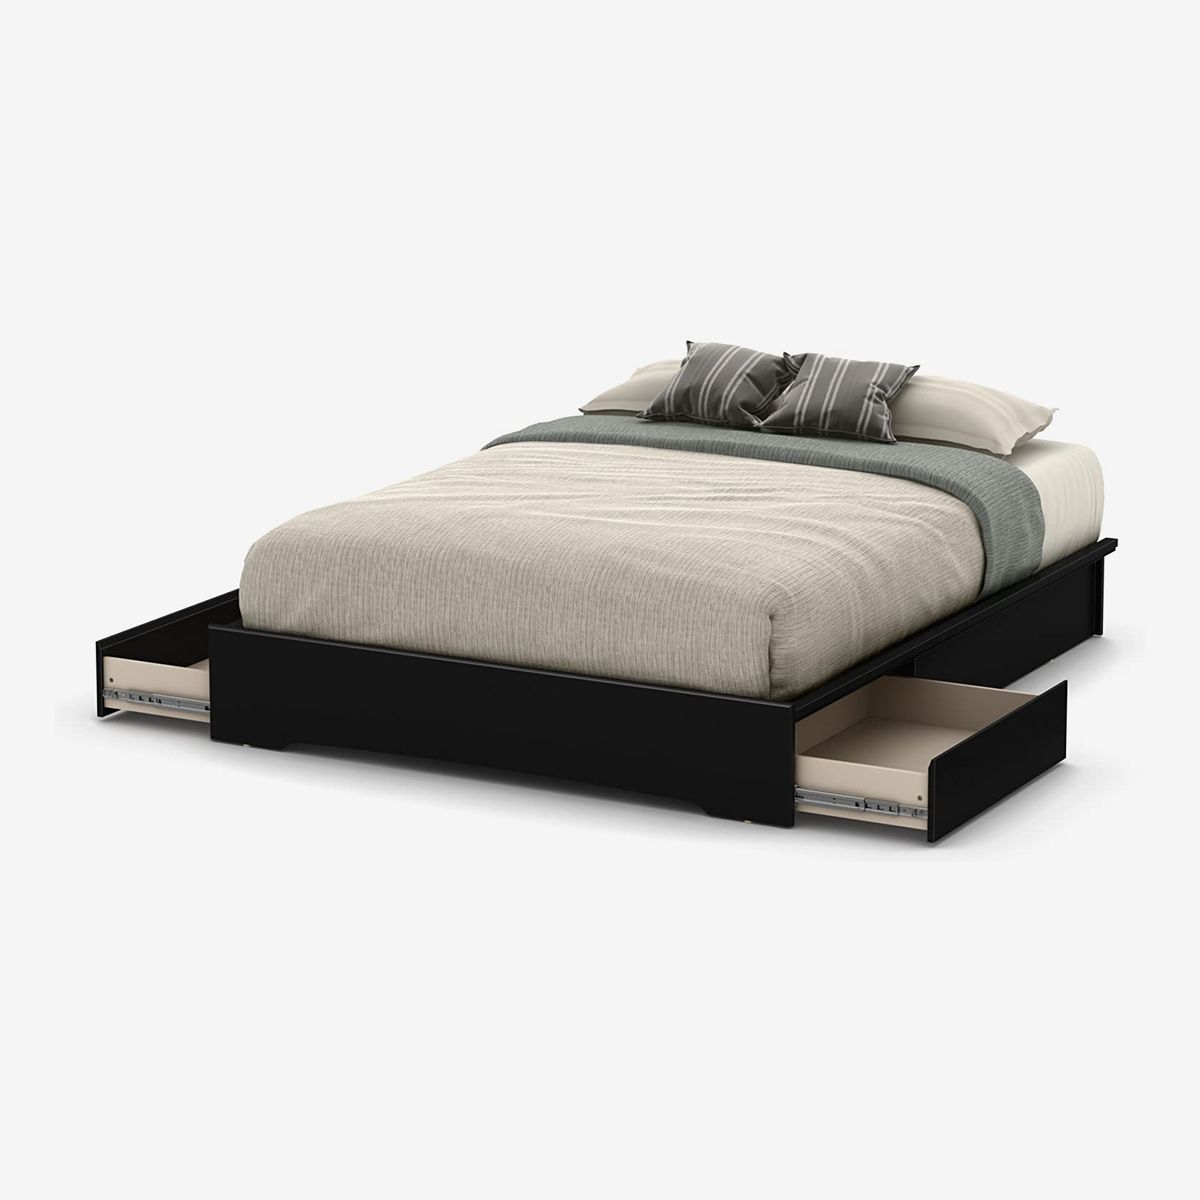 Modern Platform Beds With Storage, King Size Bed Frame With Drawers Underneath